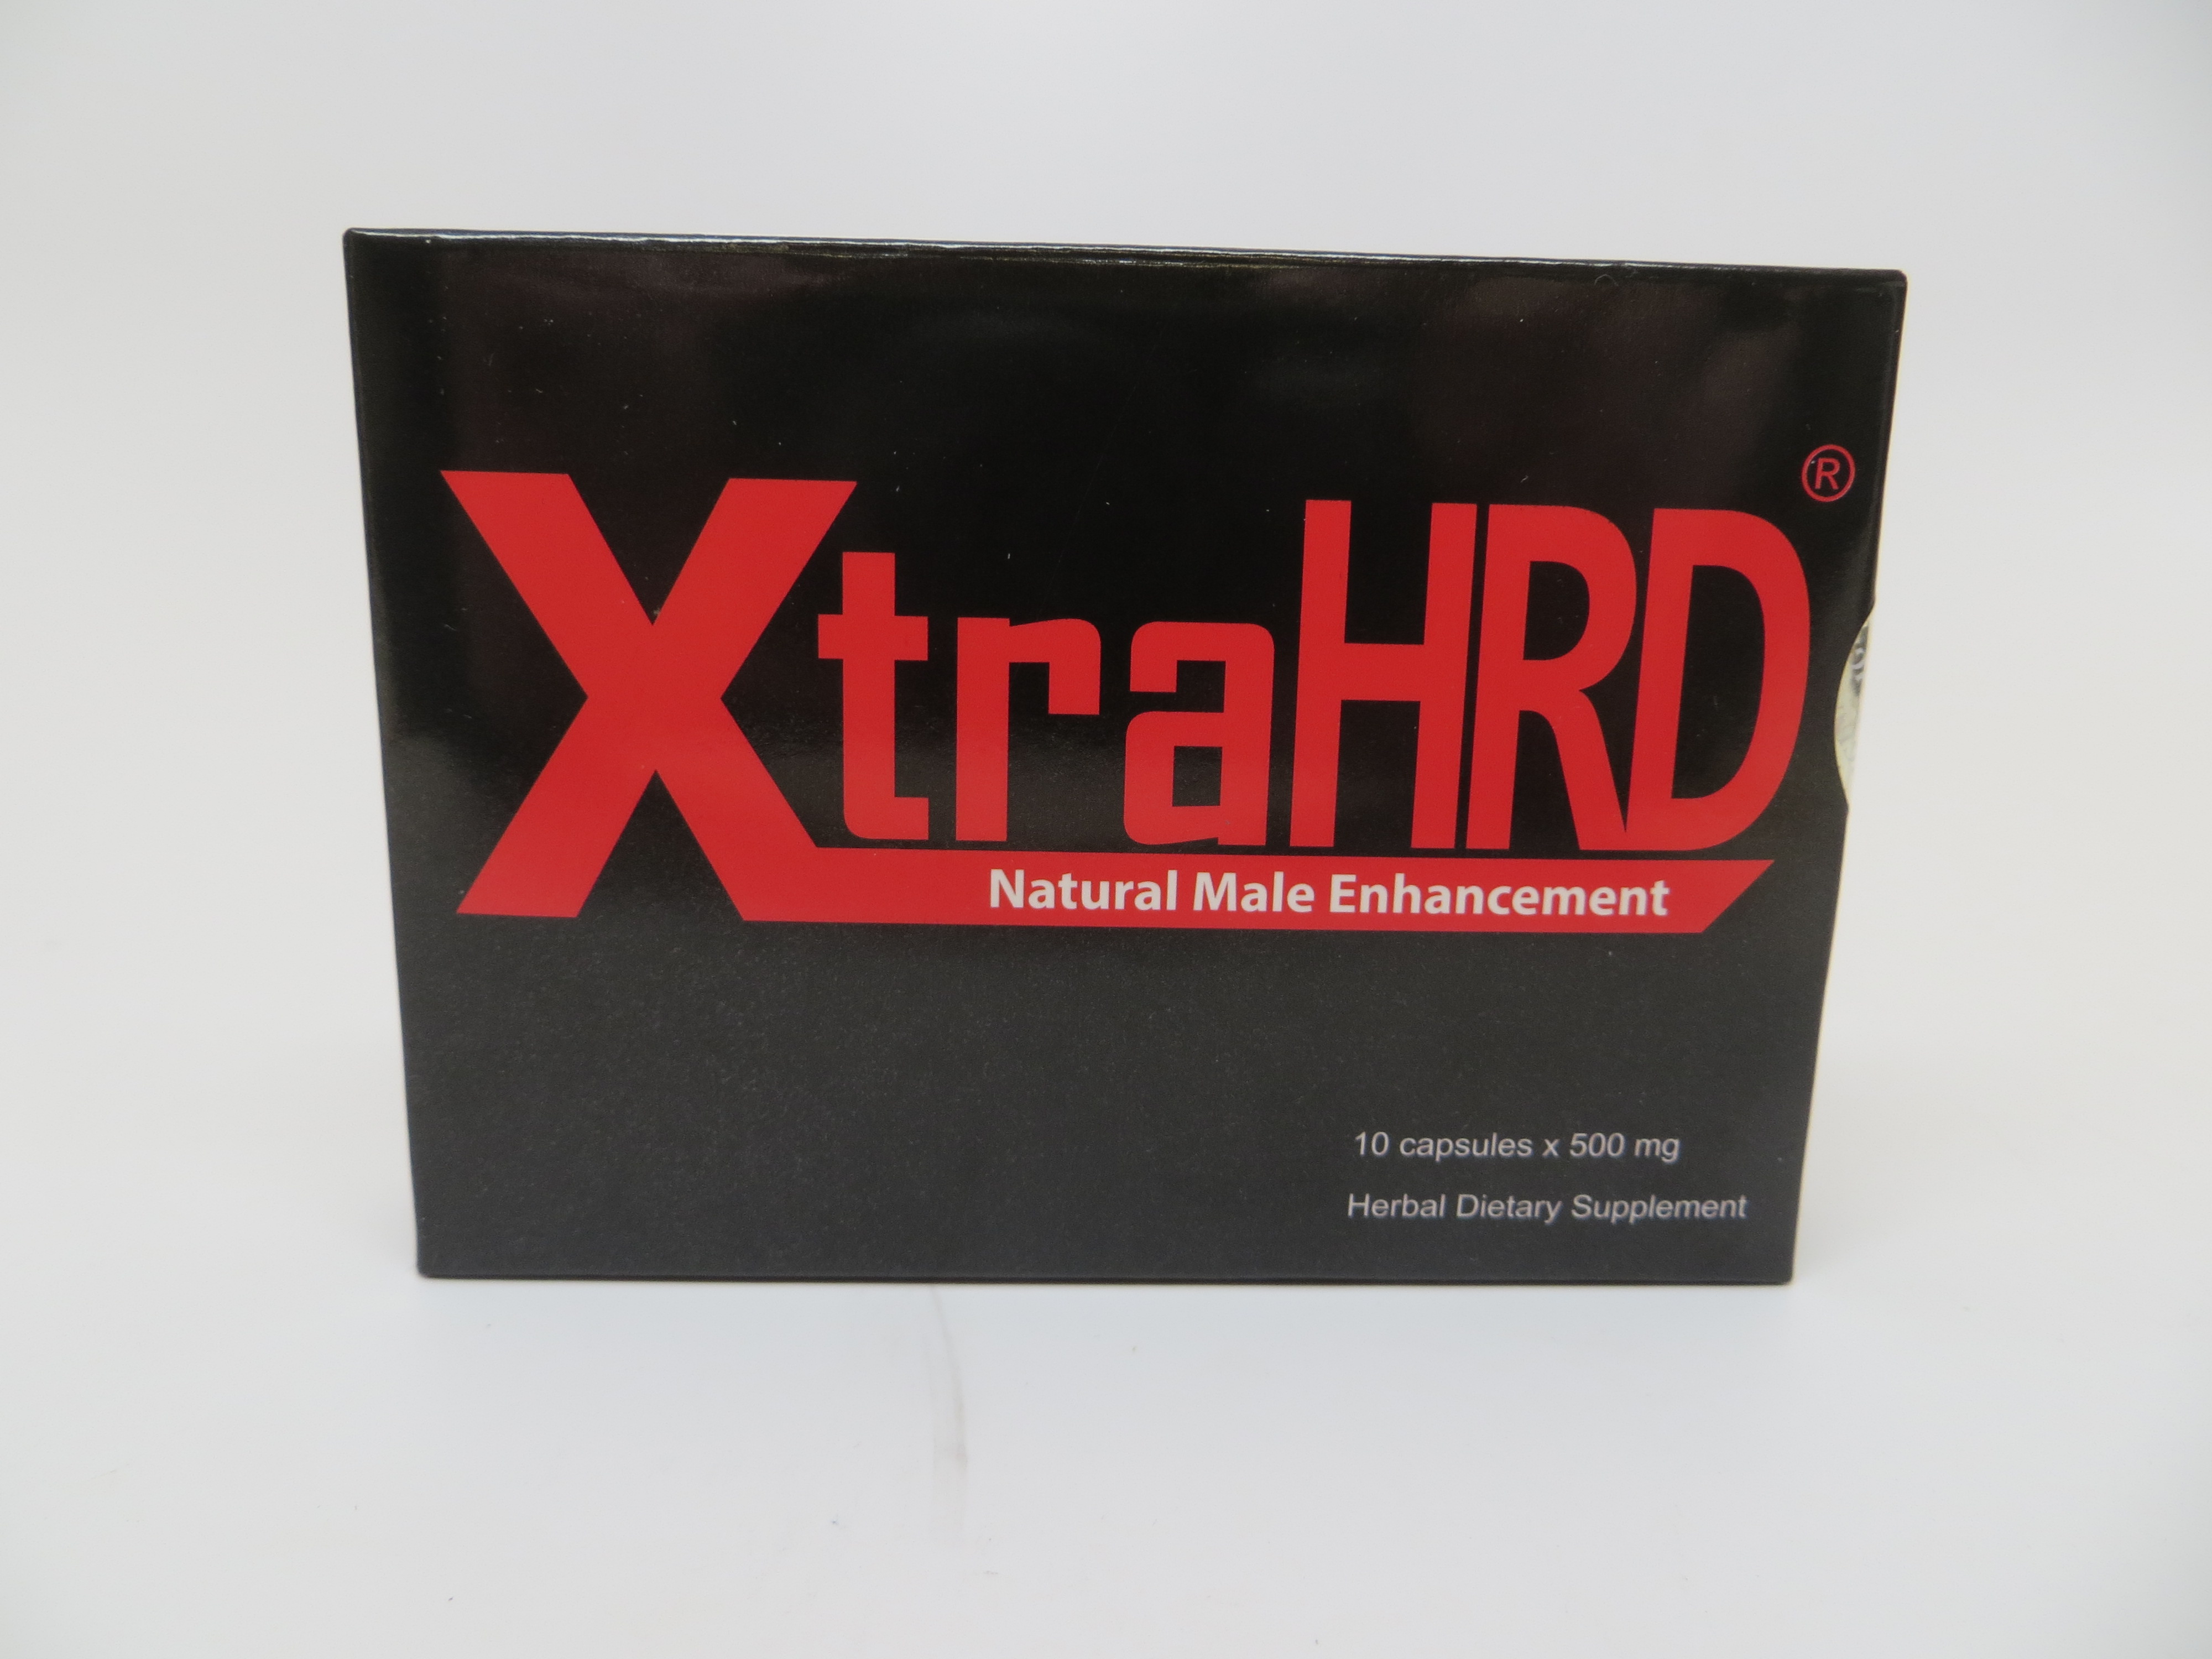 Image of the illigal product: XtraHRD